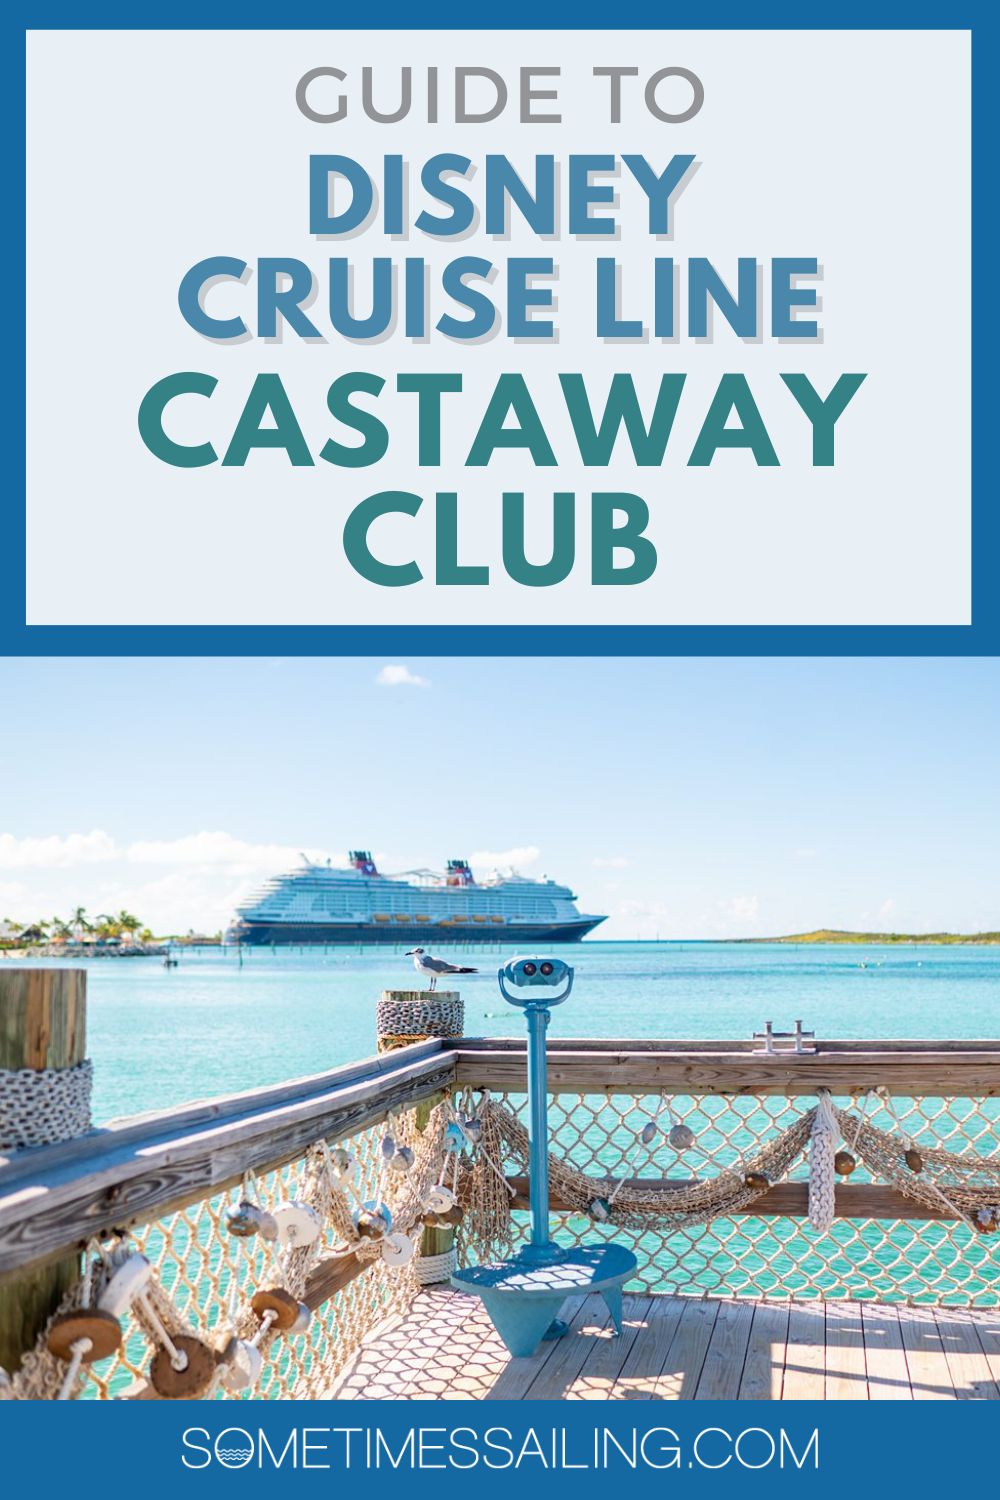 Guide to Castaway Club with a picture of the Disney Wish cruise ship in the background of a Castaway Cay deck with fish netting.